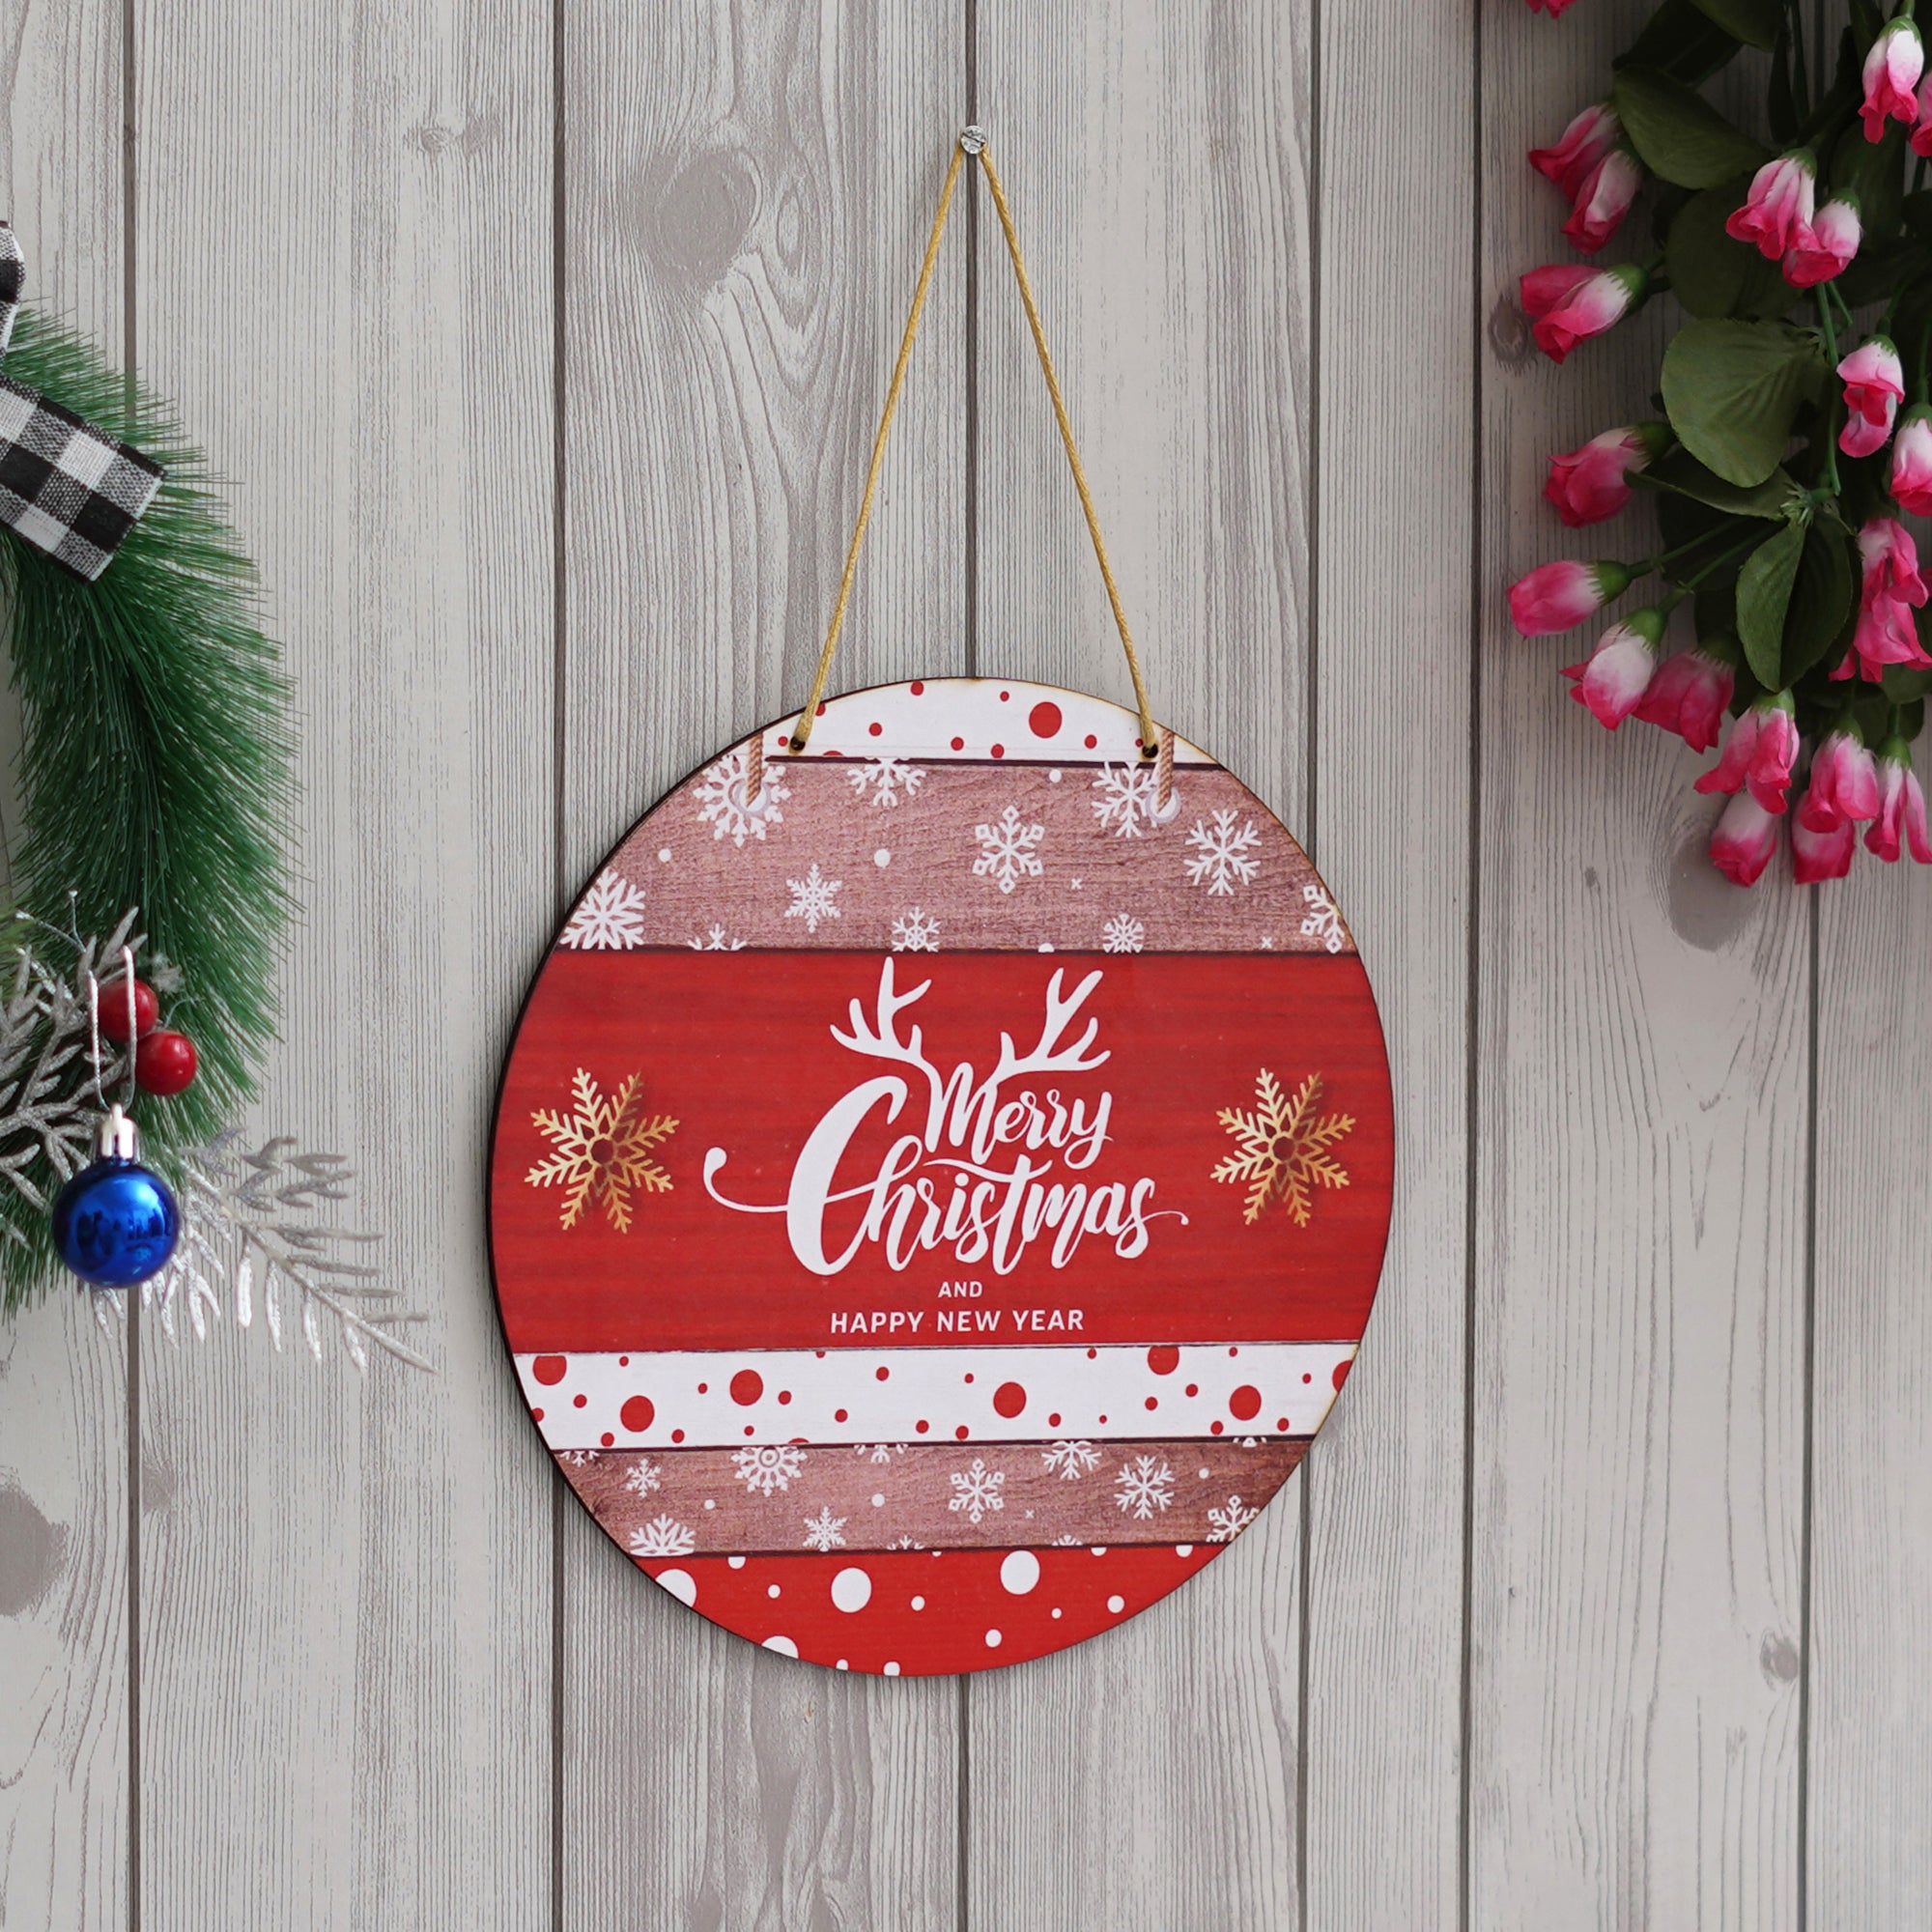 eCraftIndia "Merry Christmas and Happy New Year" Printed Wooden Door Wall Hanging for Home and Christmas Tree Decorations (Red, White, Golden) 5